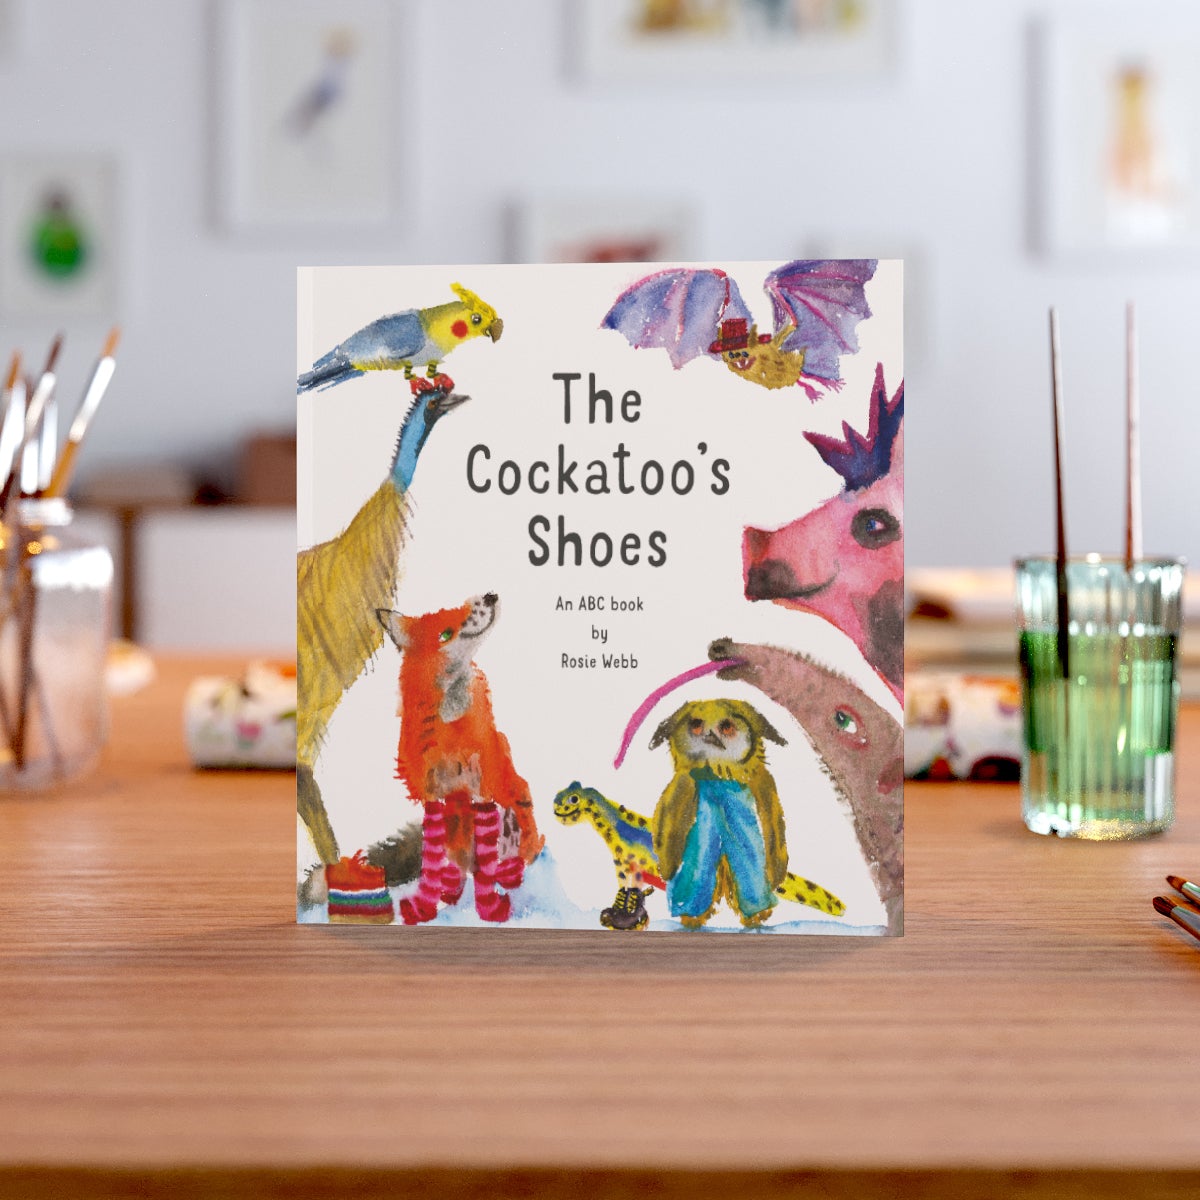 The Cockatoos Shoes Rhyming Book